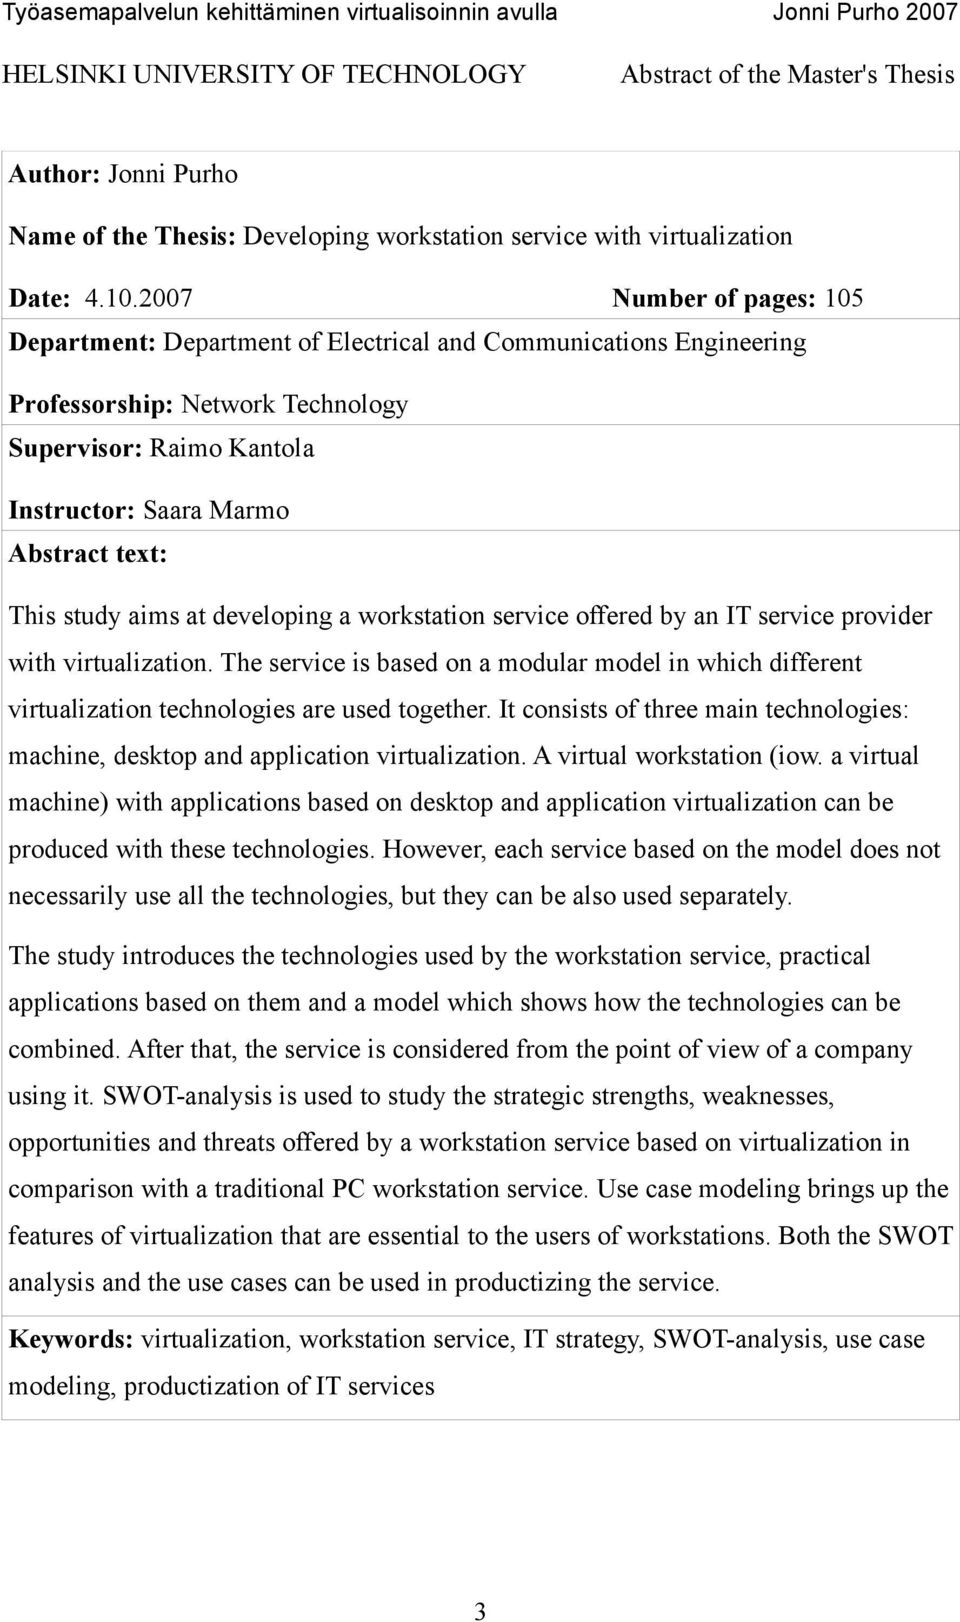 study aims at developing a workstation service offered by an IT service provider with virtualization.